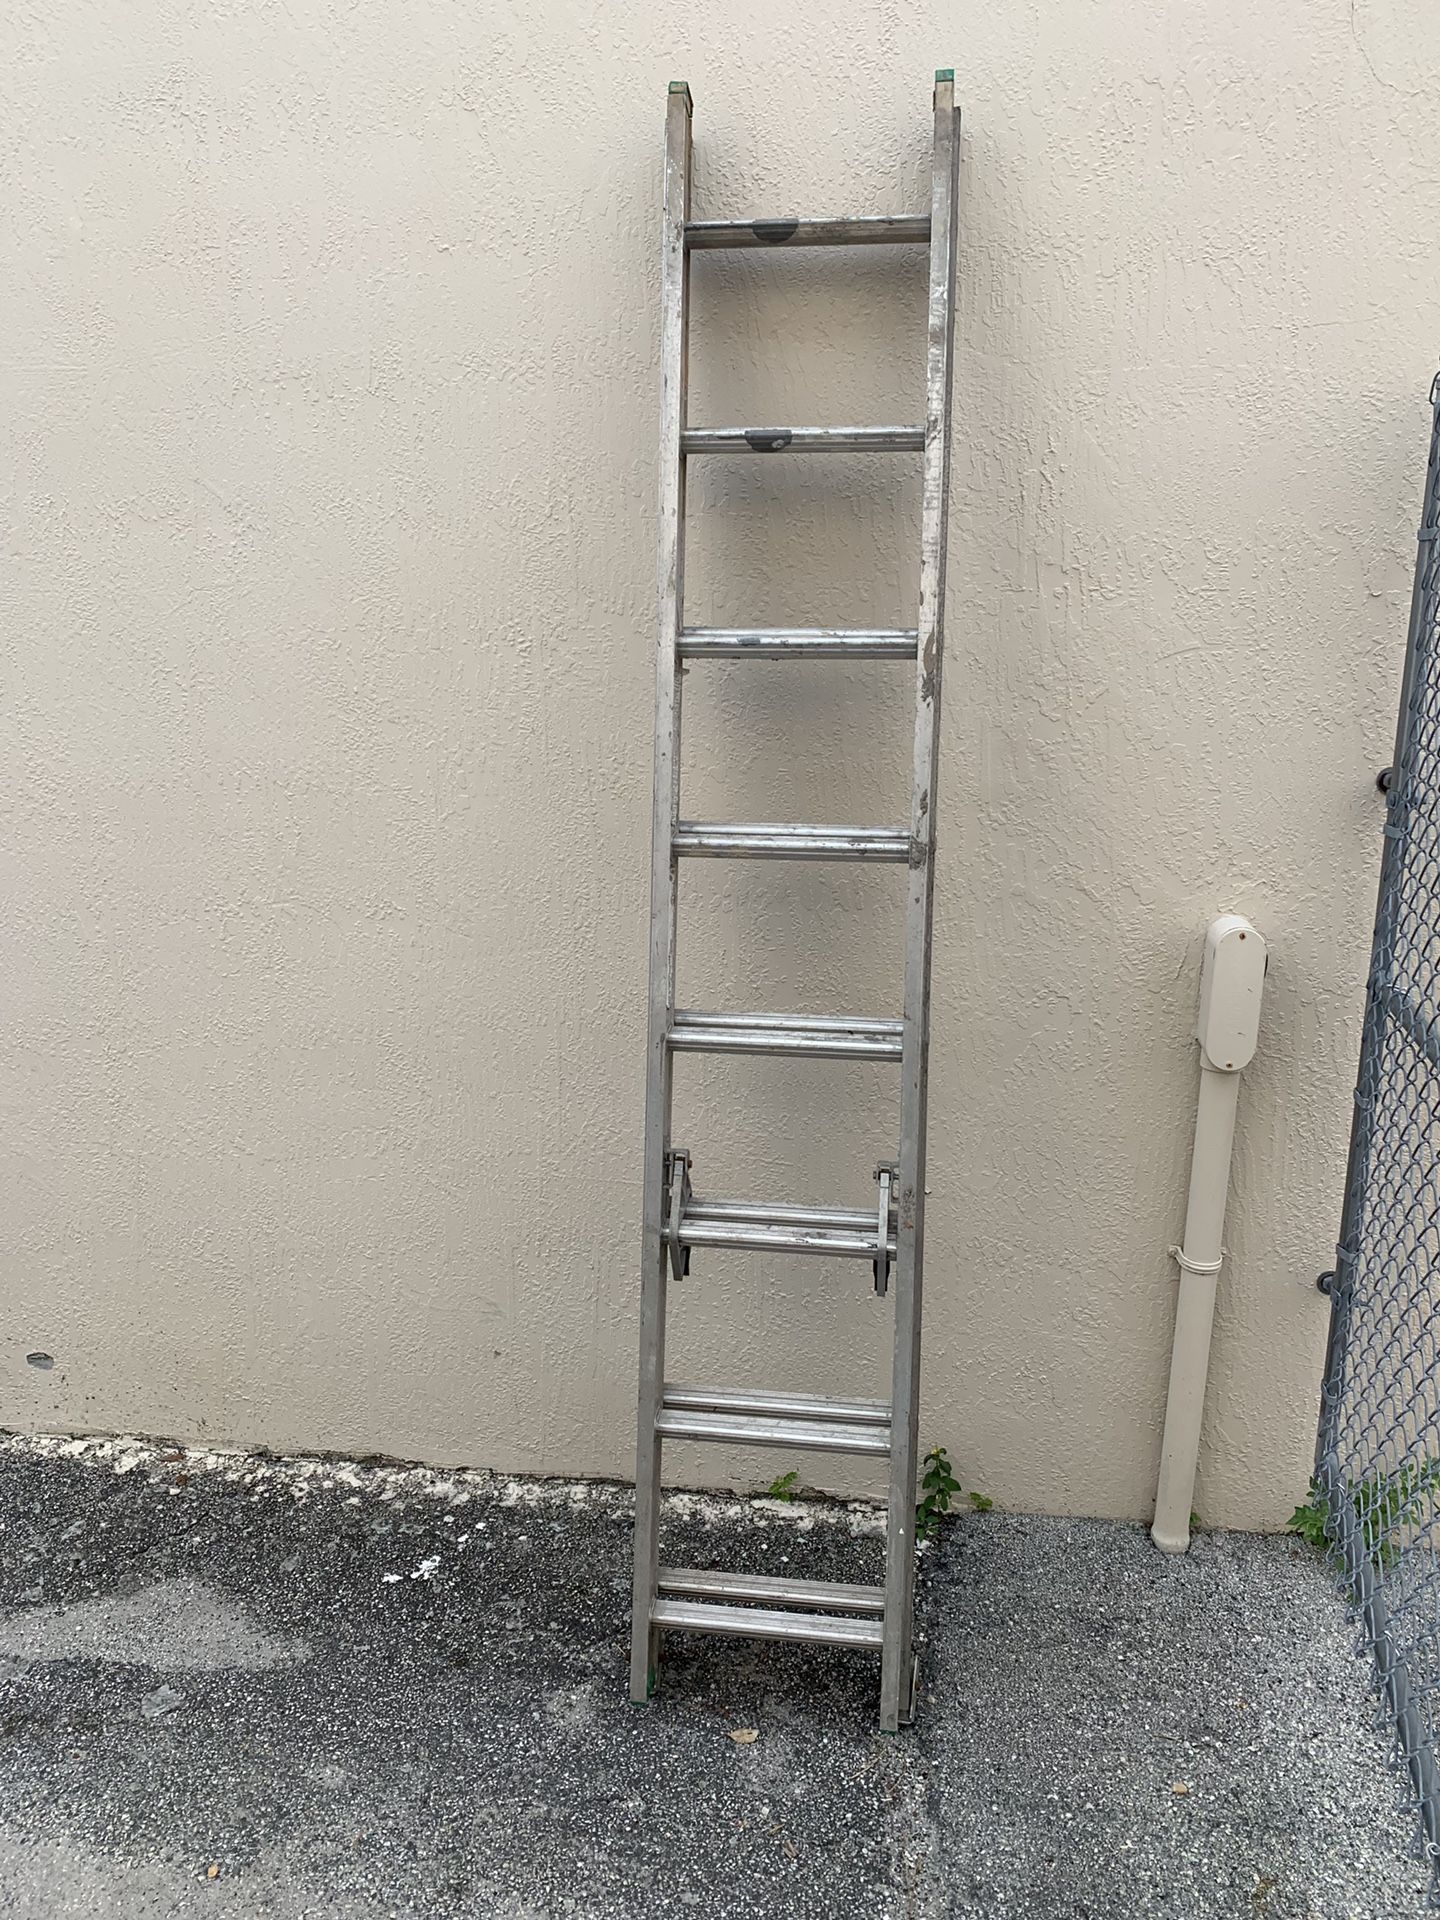 Werner 16 Foot Extension Ladder - PRICE IS FIRM